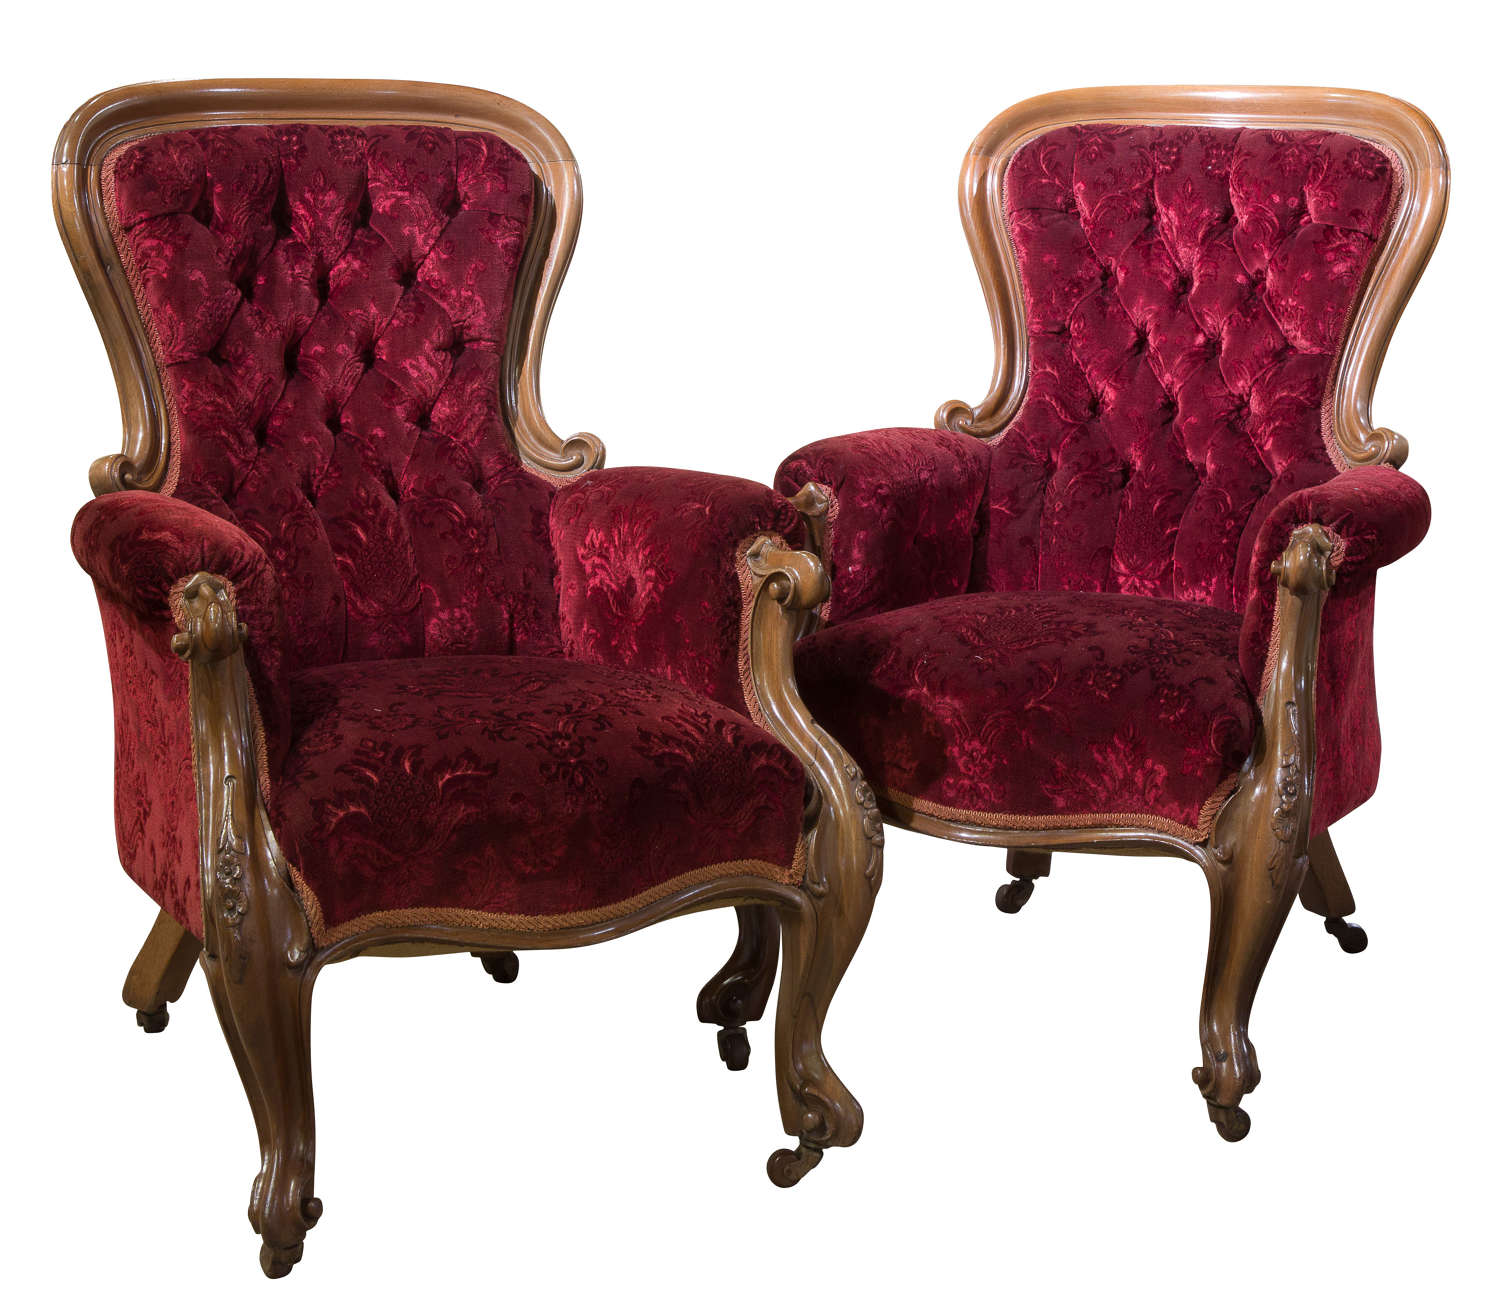 Pair of mahogany framed Victorian chairs